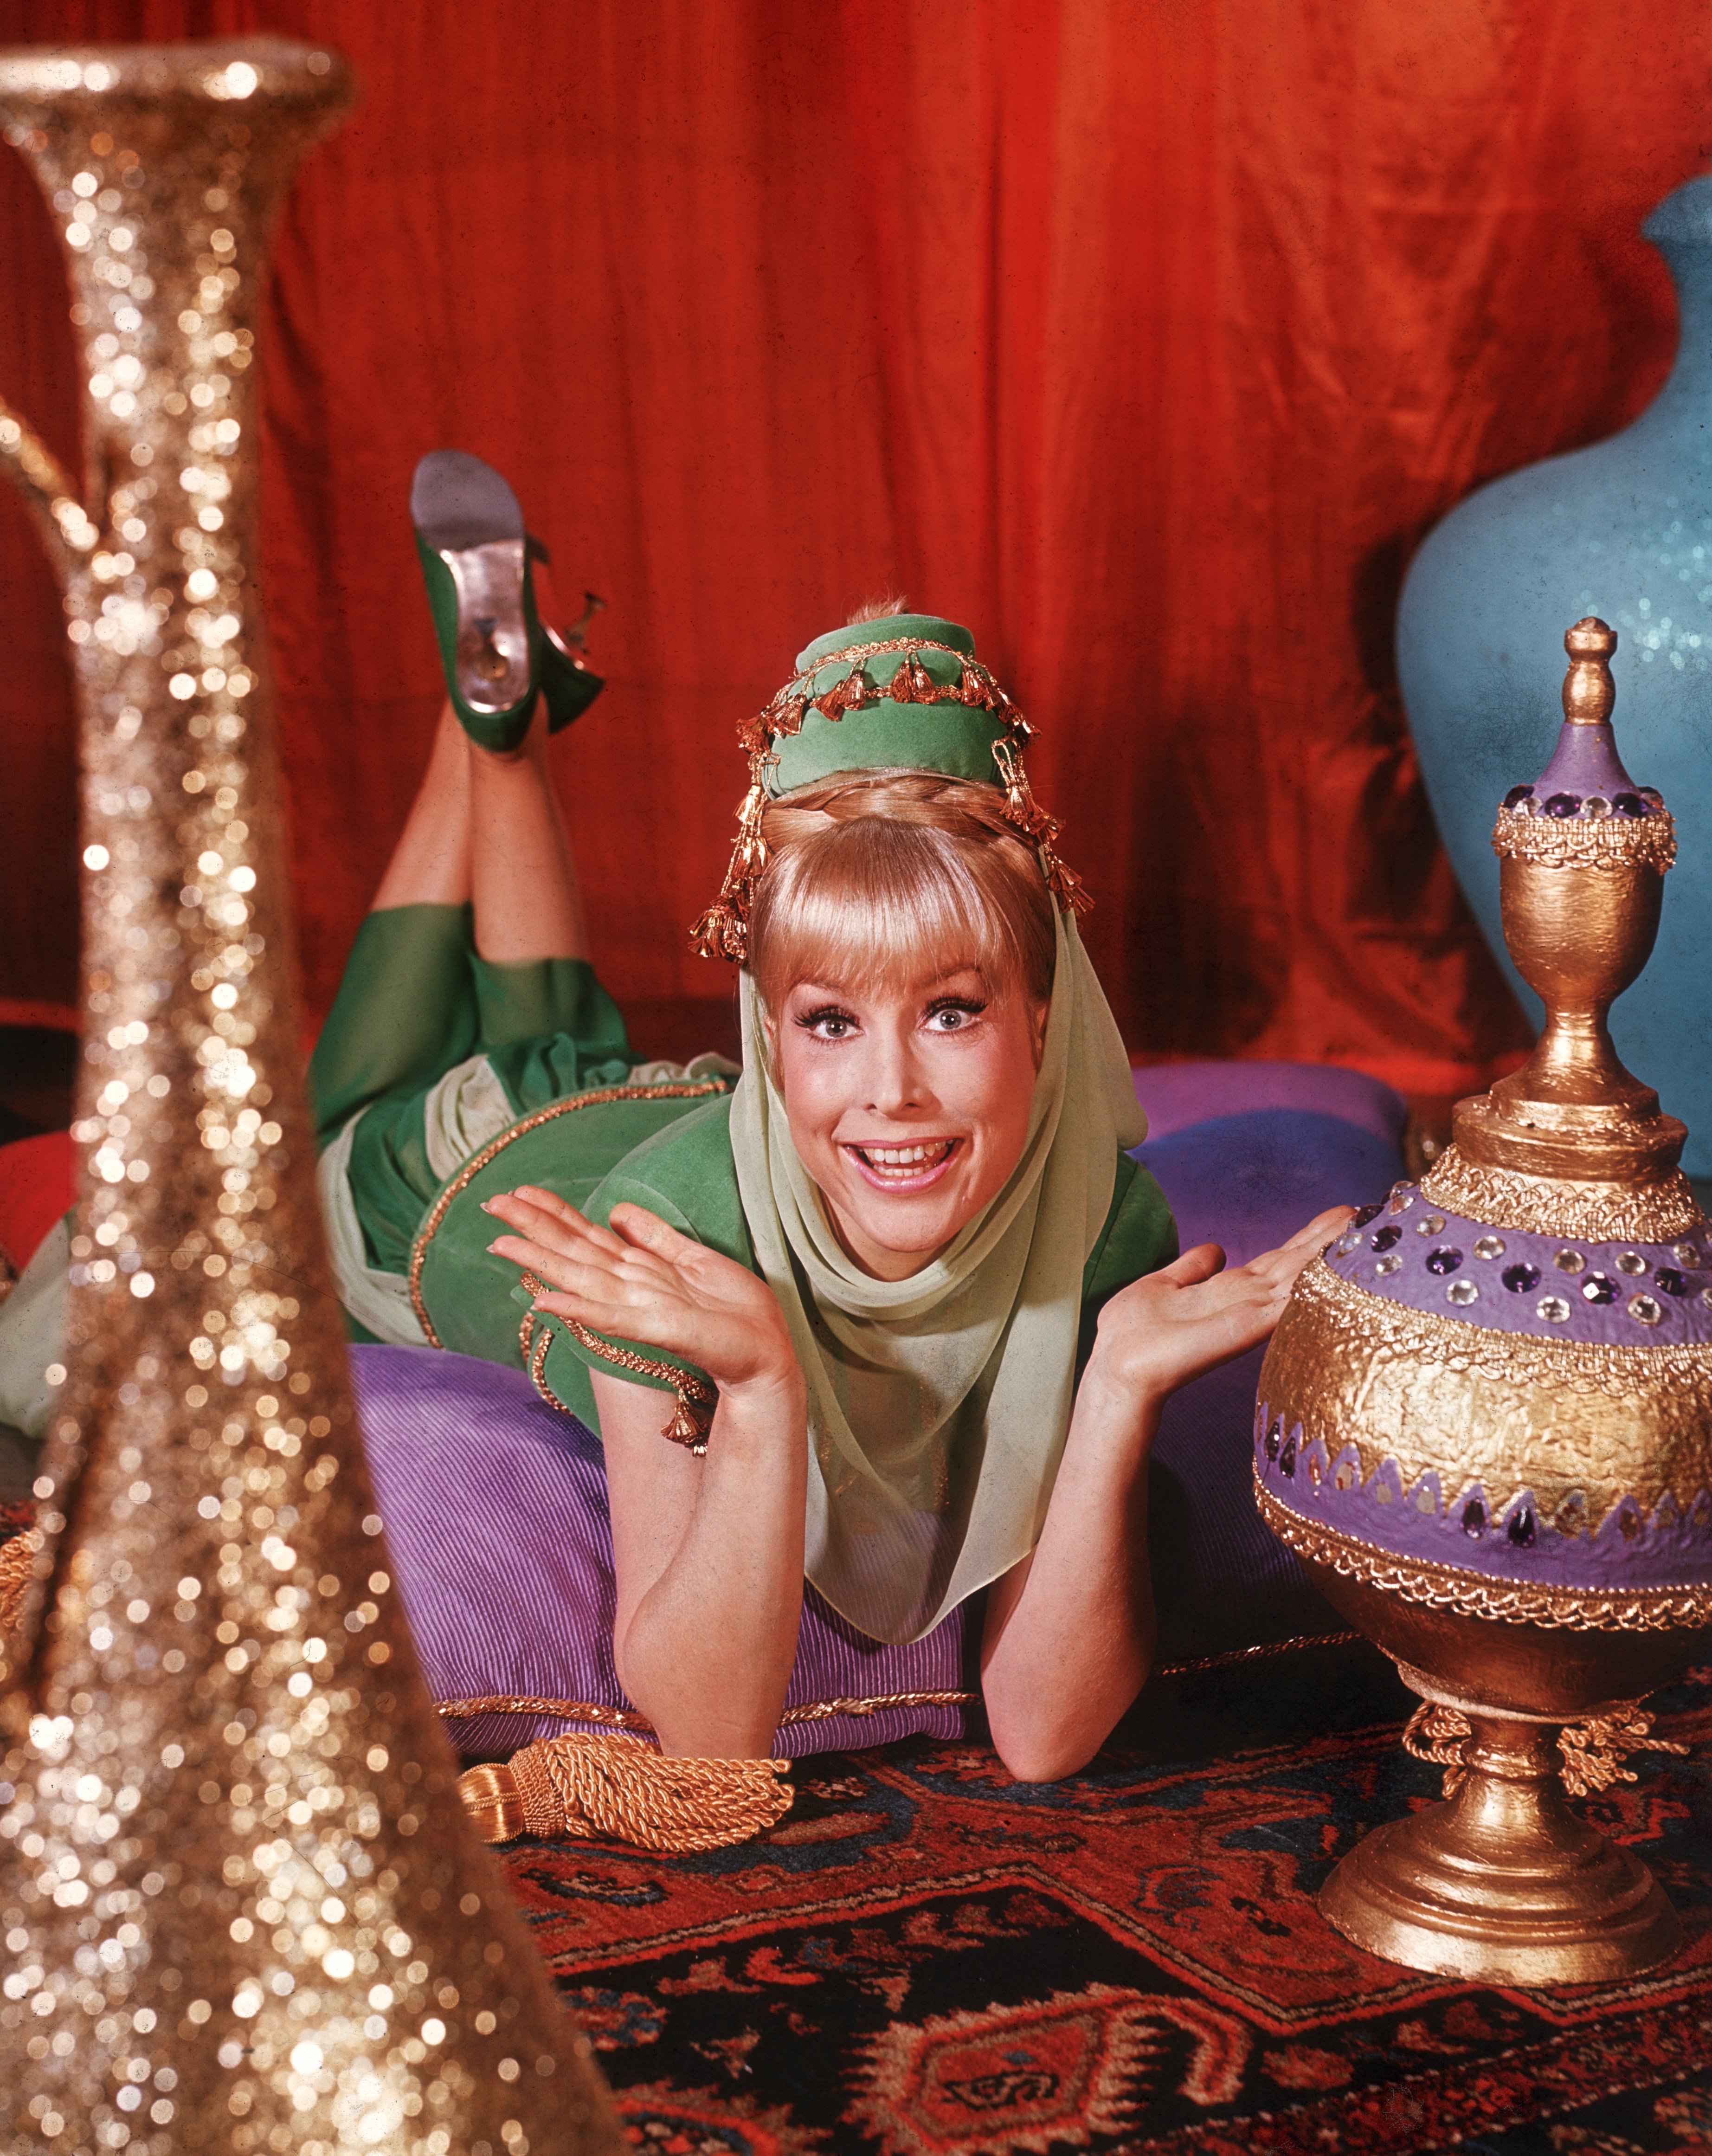 Portrait of Barbara Eden for "I Dream of Jeannie," 1965 | Source: Getty Images